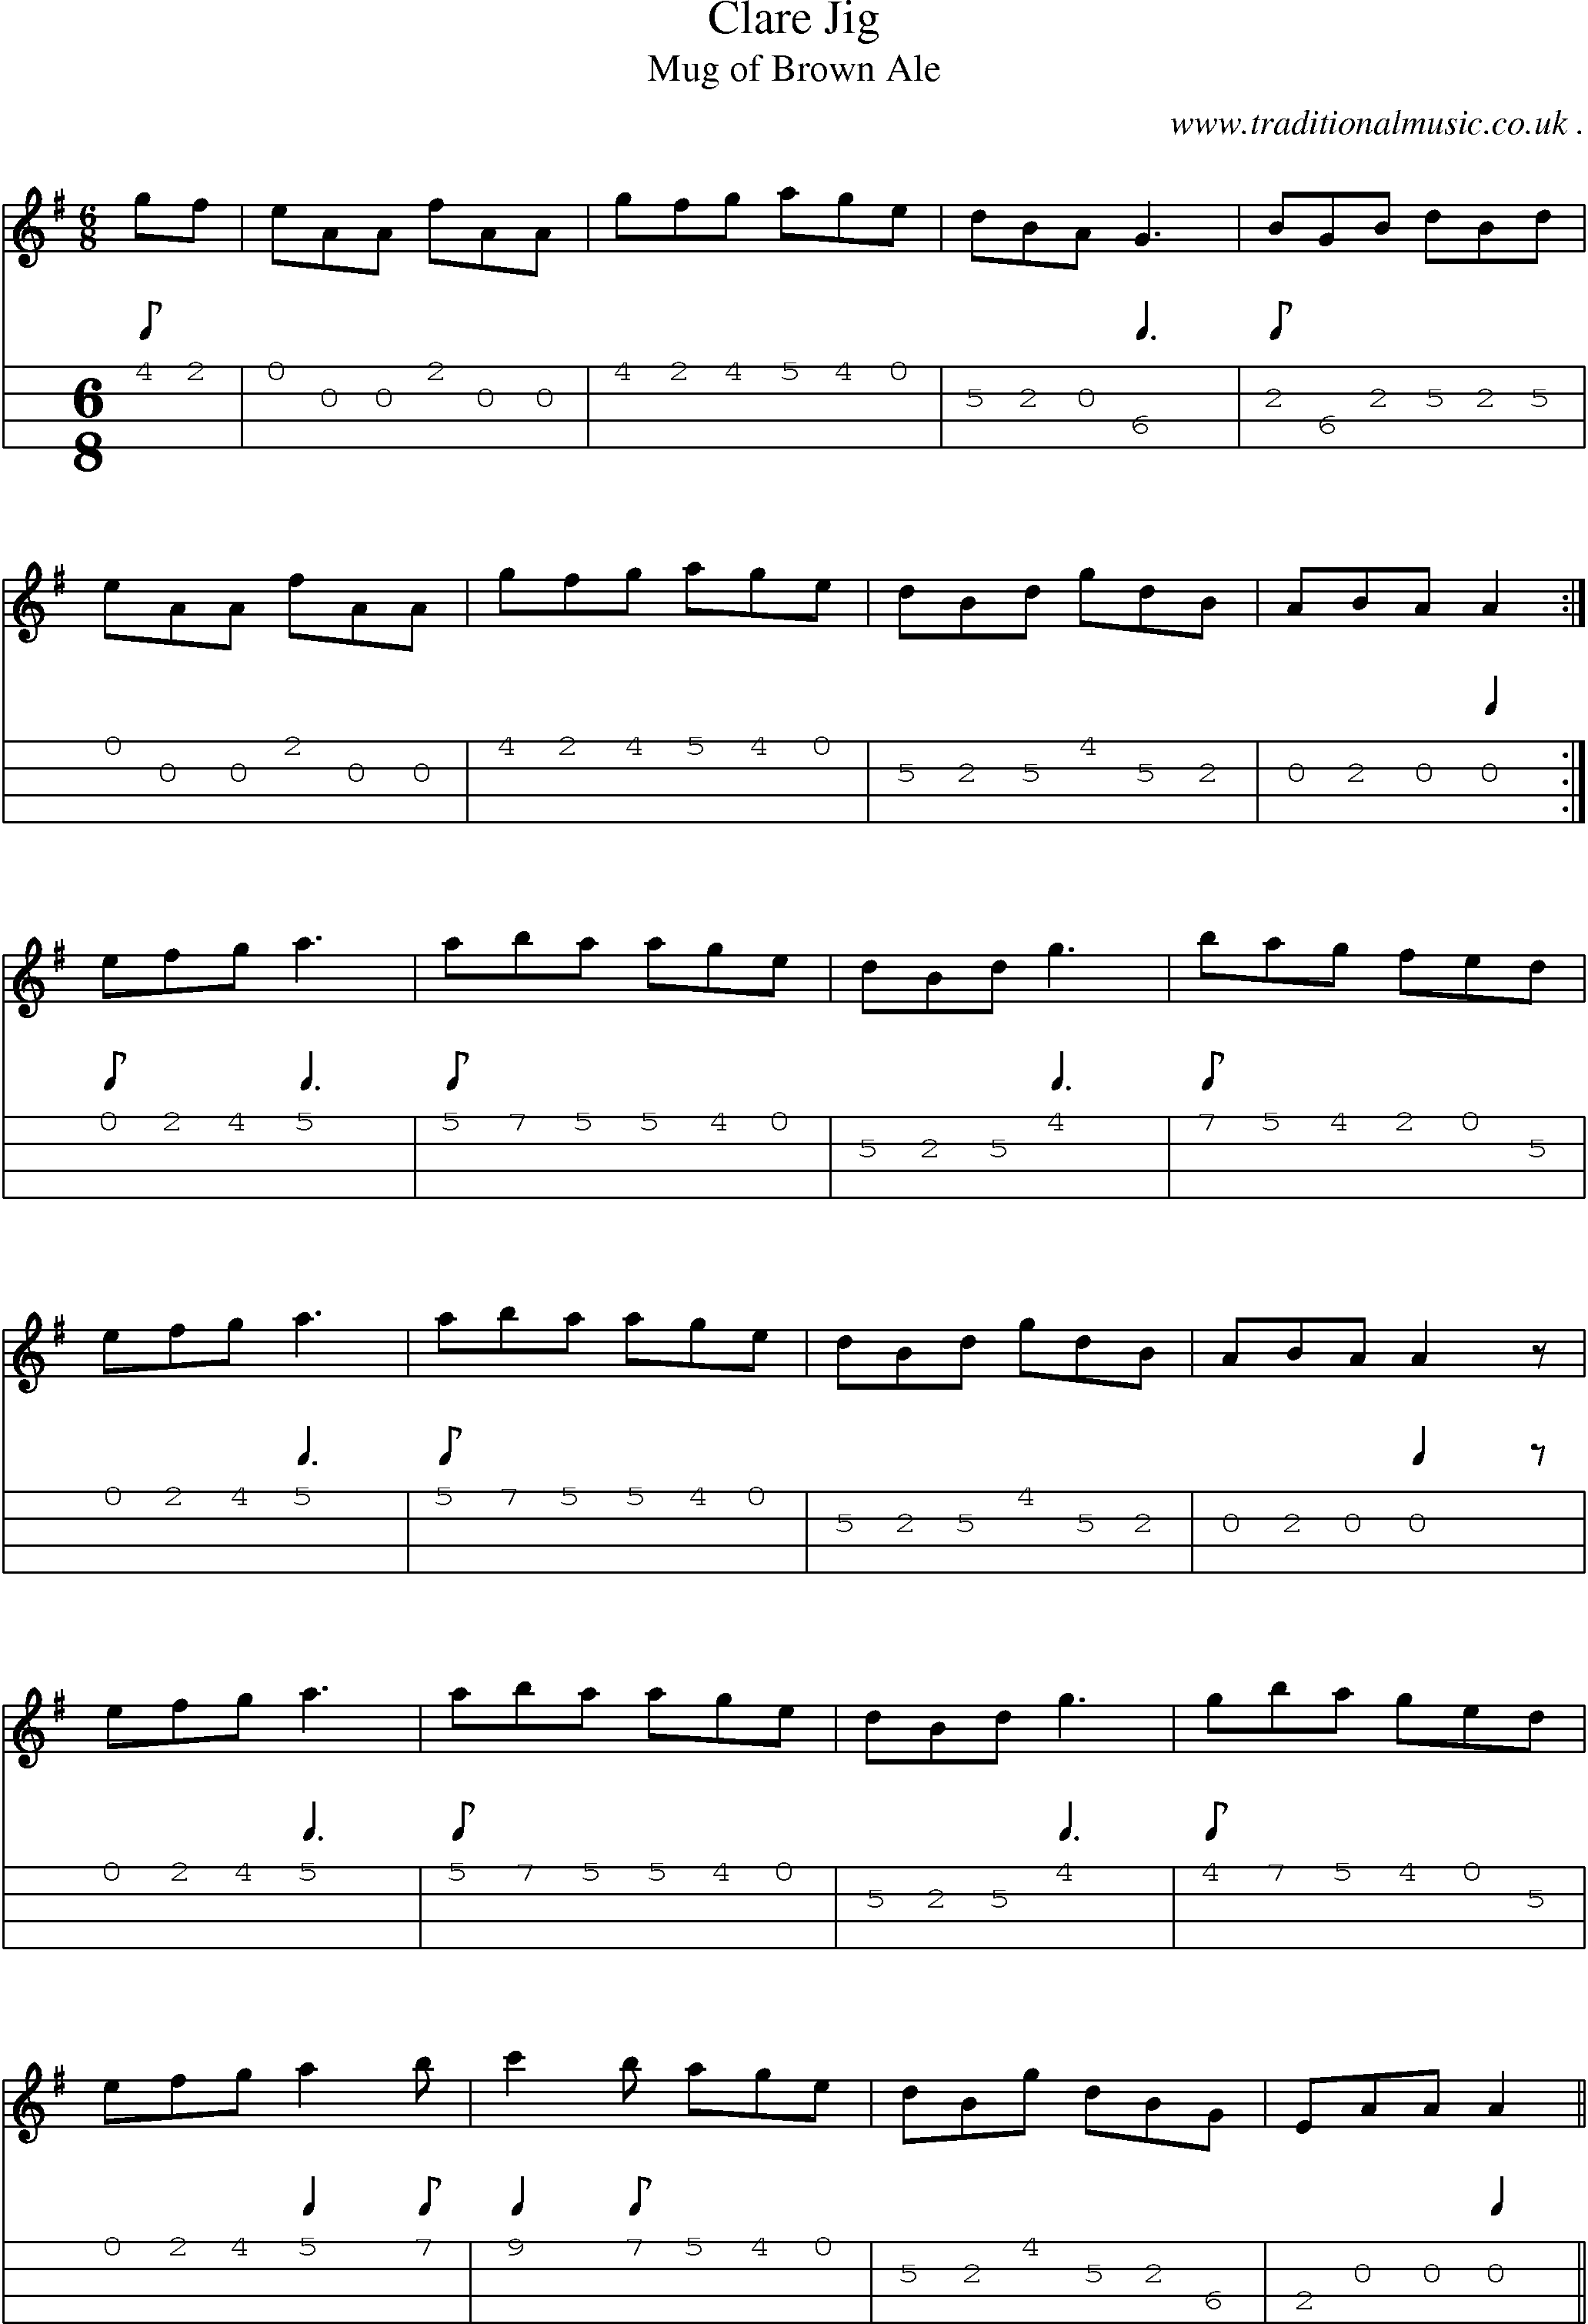 Sheet-Music and Mandolin Tabs for Clare Jig